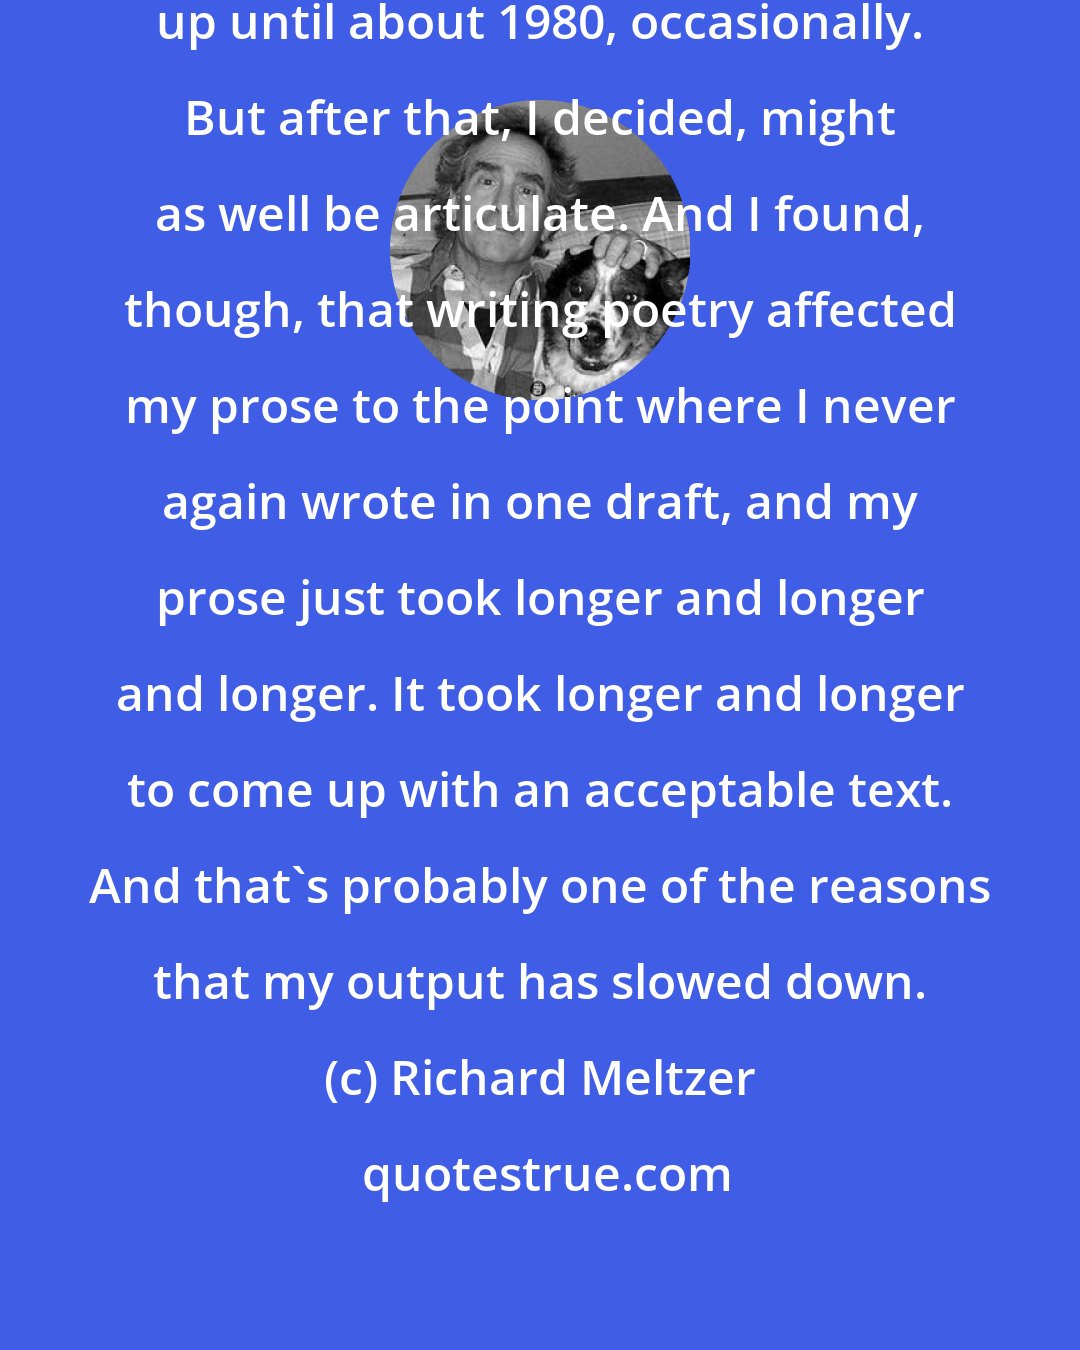 Richard Meltzer: I didn't mind writing incoherently, up until about 1980, occasionally. But after that, I decided, might as well be articulate. And I found, though, that writing poetry affected my prose to the point where I never again wrote in one draft, and my prose just took longer and longer and longer. It took longer and longer to come up with an acceptable text. And that's probably one of the reasons that my output has slowed down.